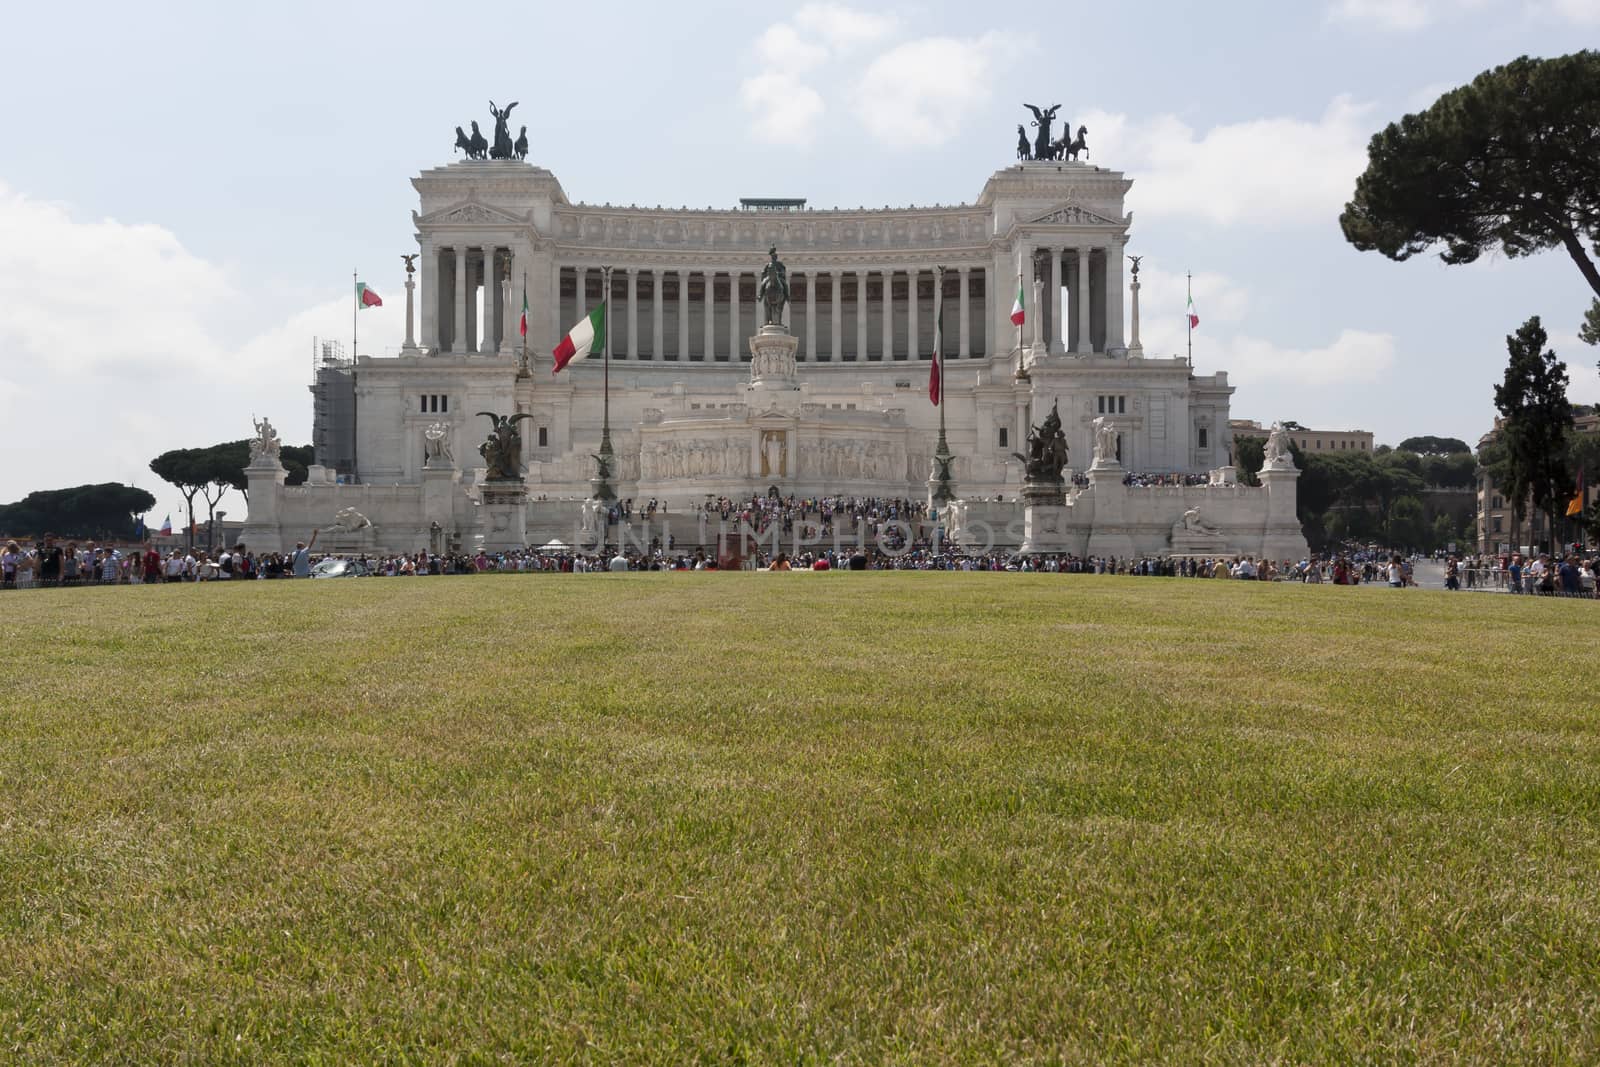 Rome Altar of the Nation on the day of the anniversary of the June 2